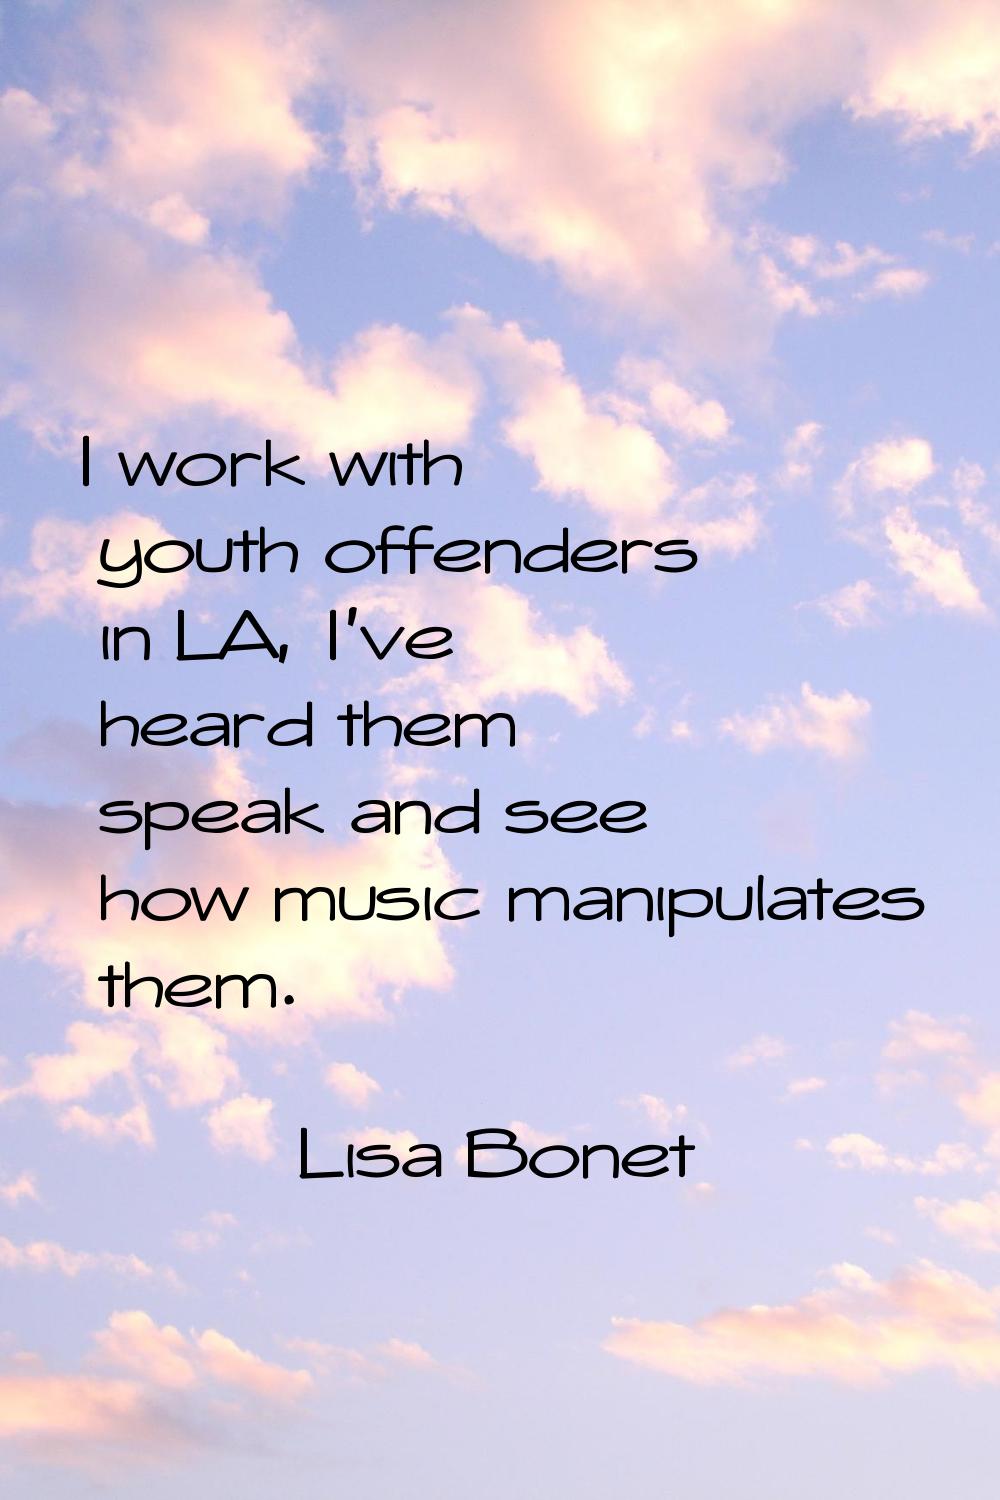 I work with youth offenders in LA, I've heard them speak and see how music manipulates them.